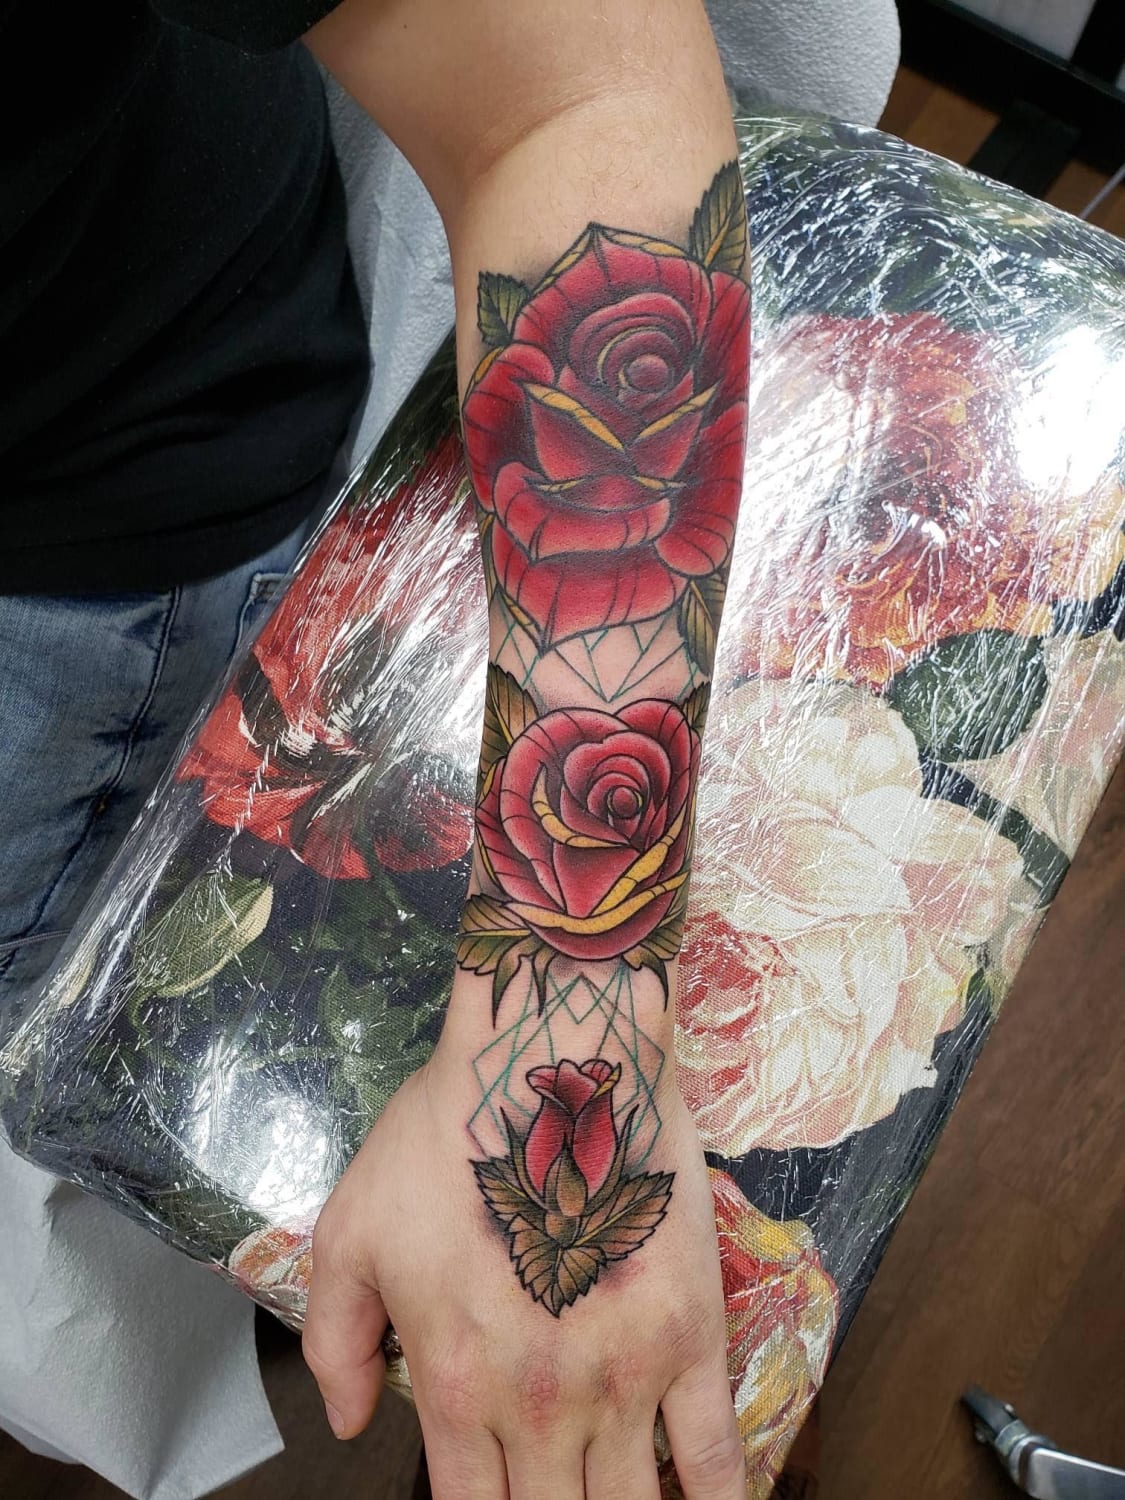 Blooming rose done by Iris @ Cipher Tattoo, LA